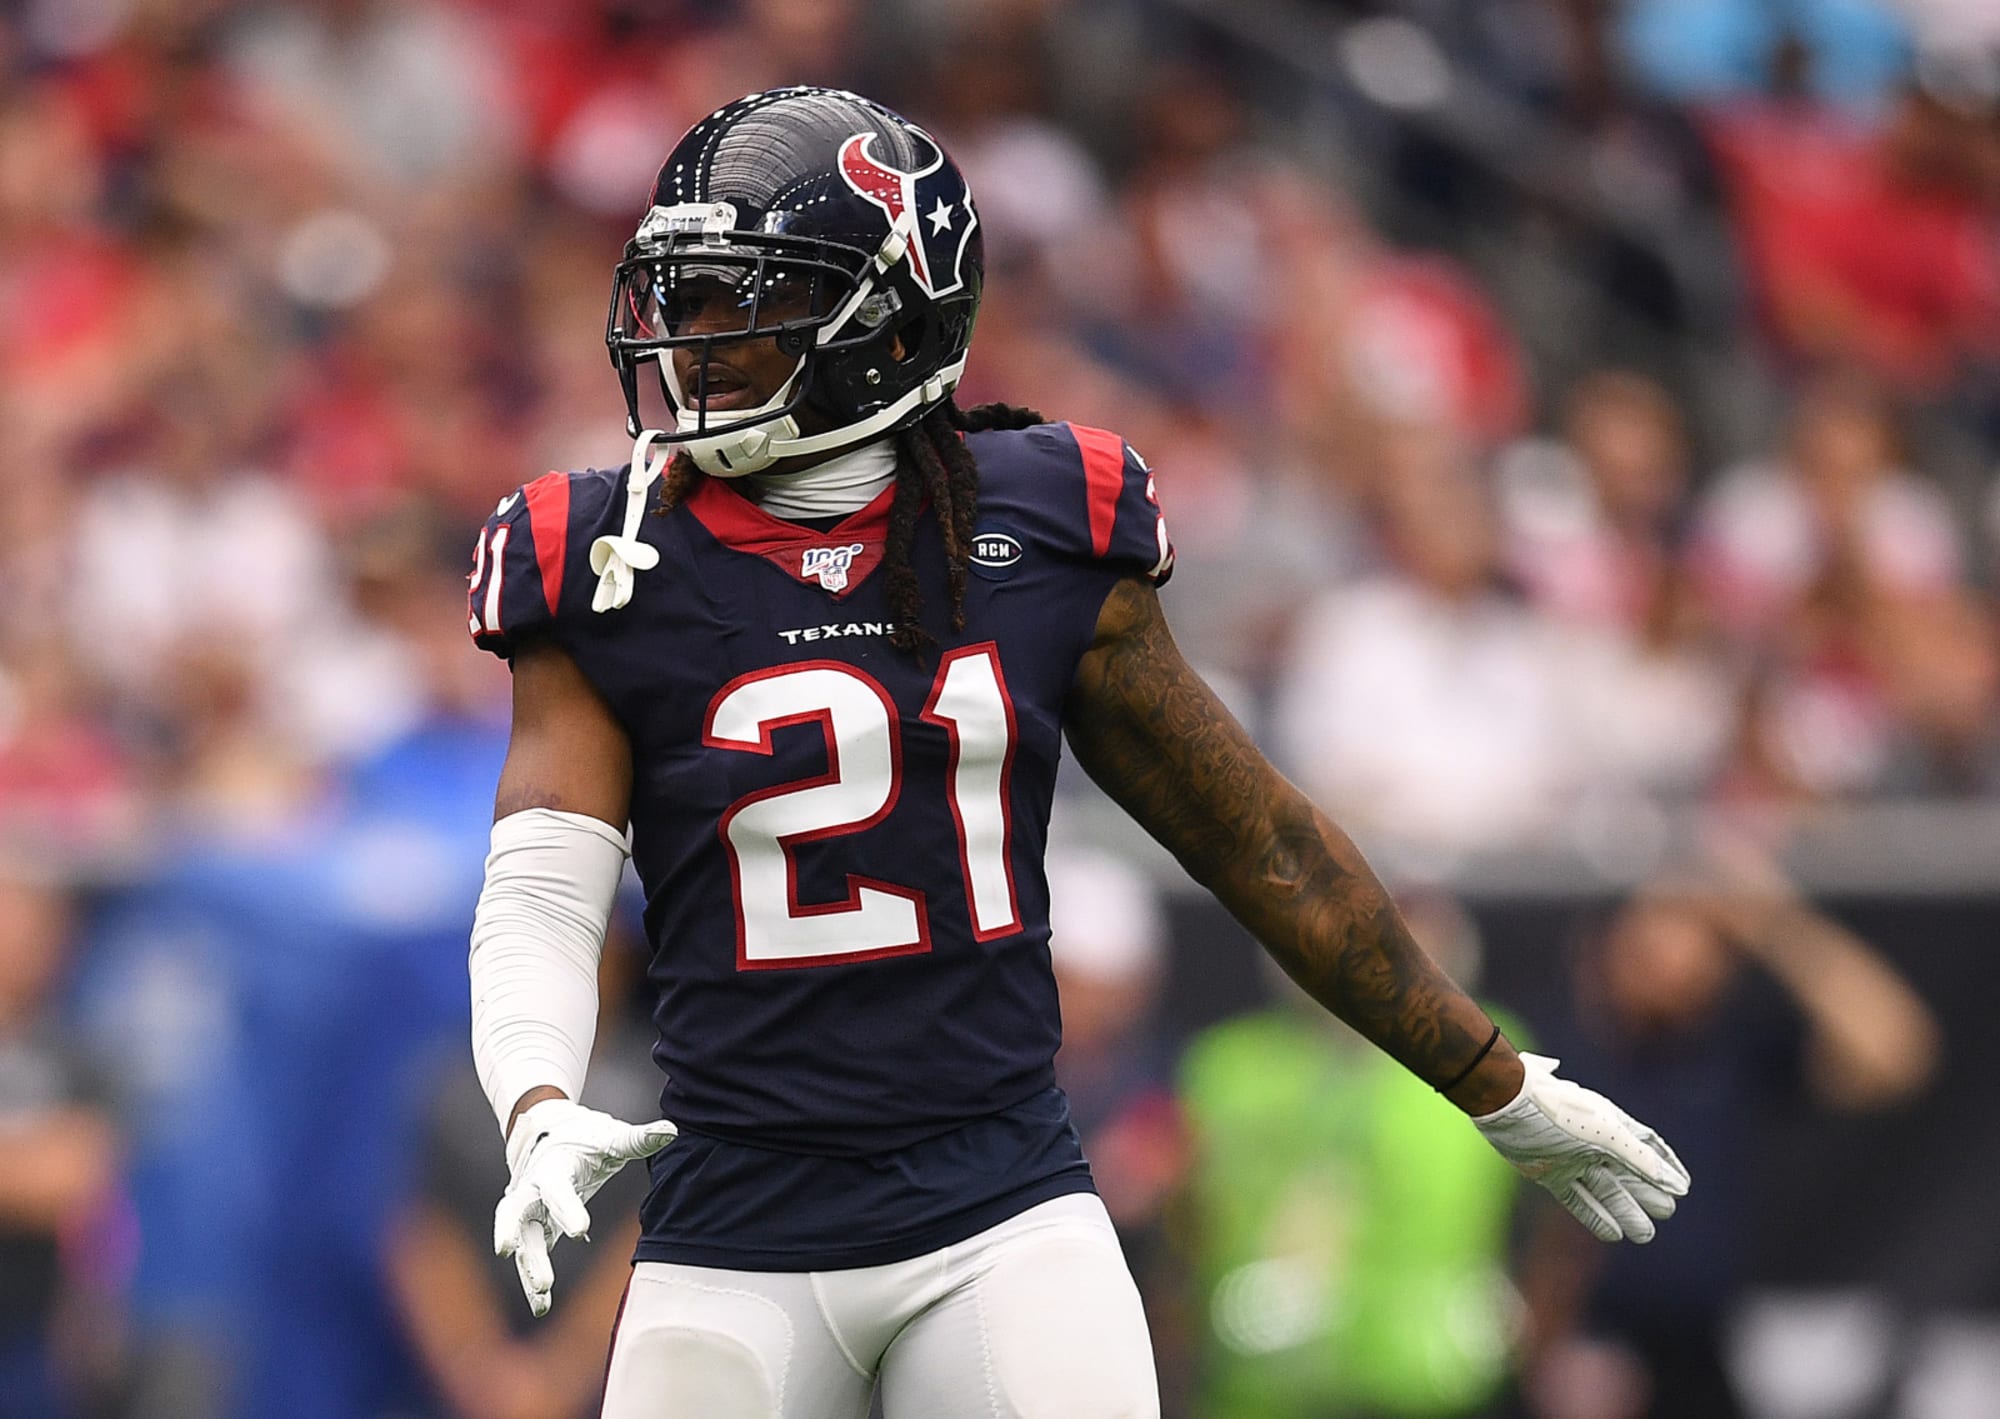 Houston Texans: Bradley Roby signals to fans what he needs to do